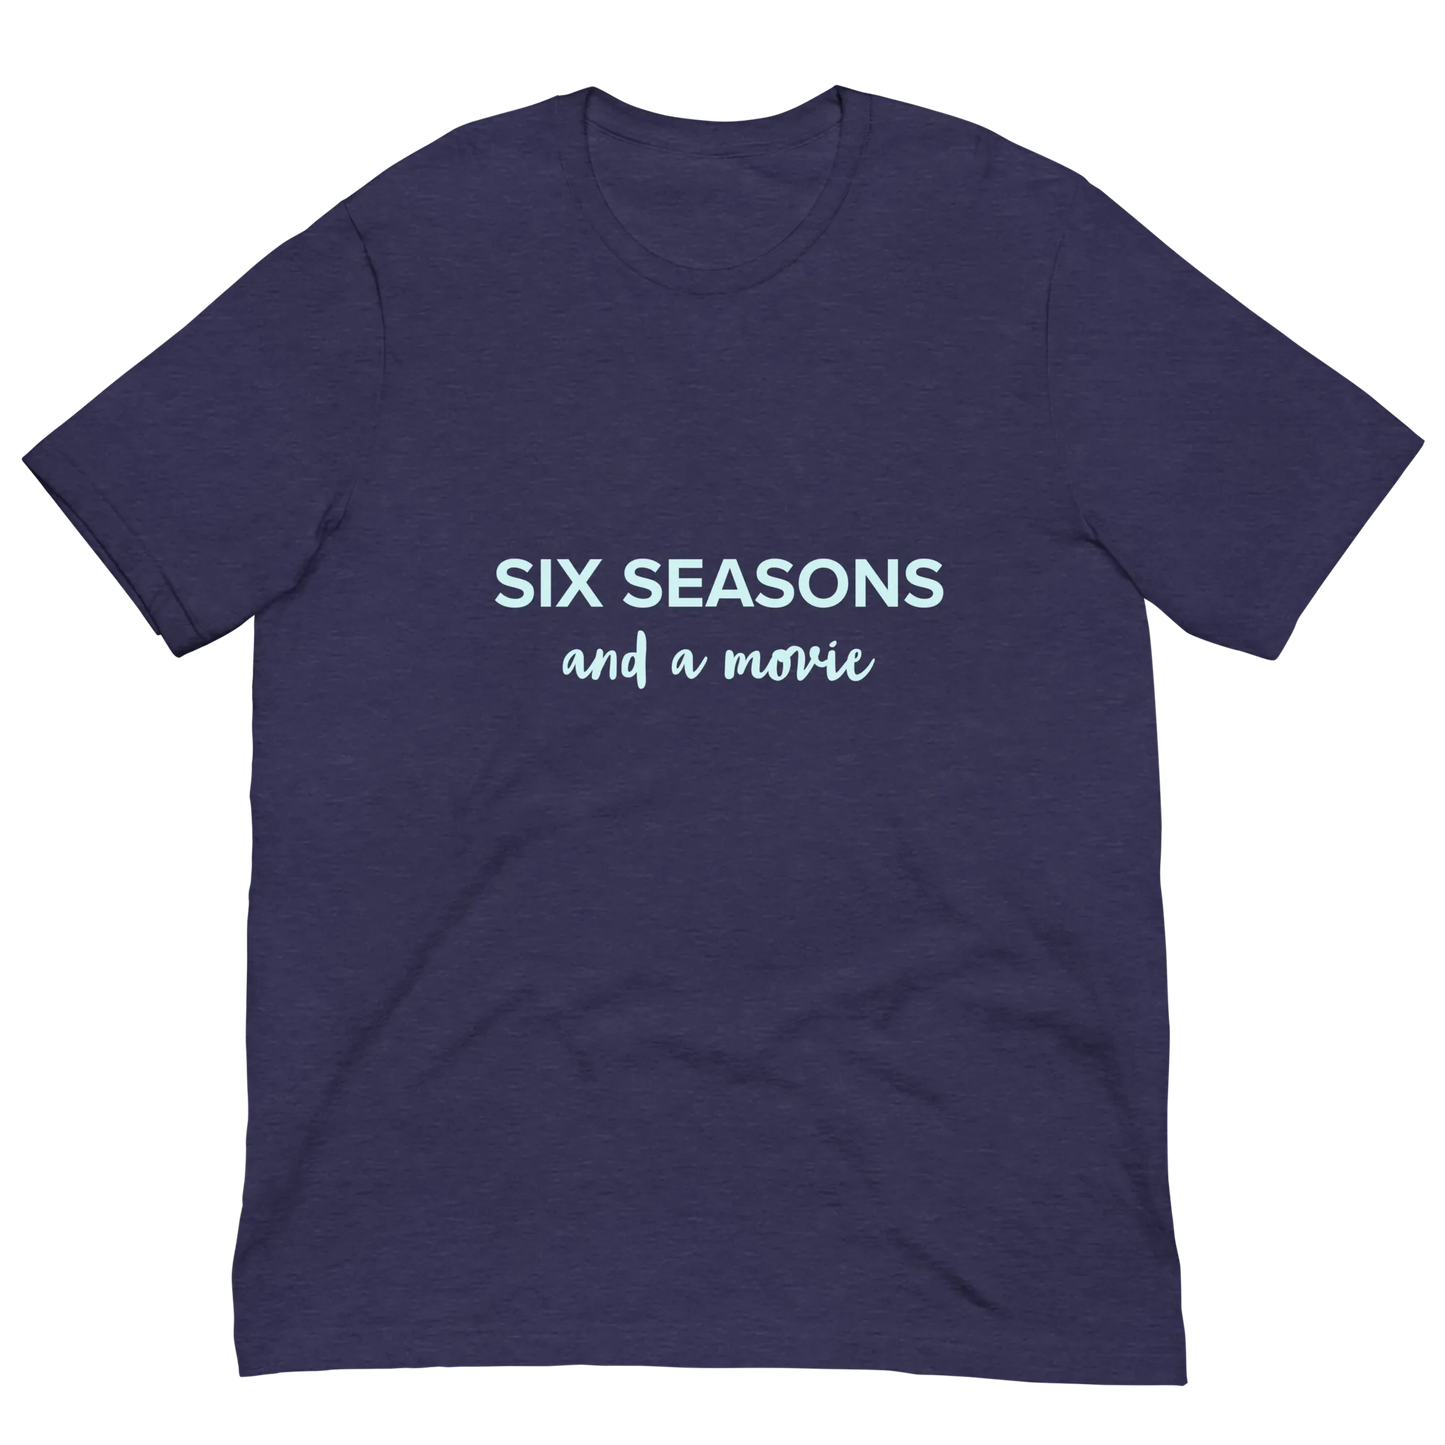 Six Seasons and a Movie Tee in Heather Midnight Navy plus-size flatlay